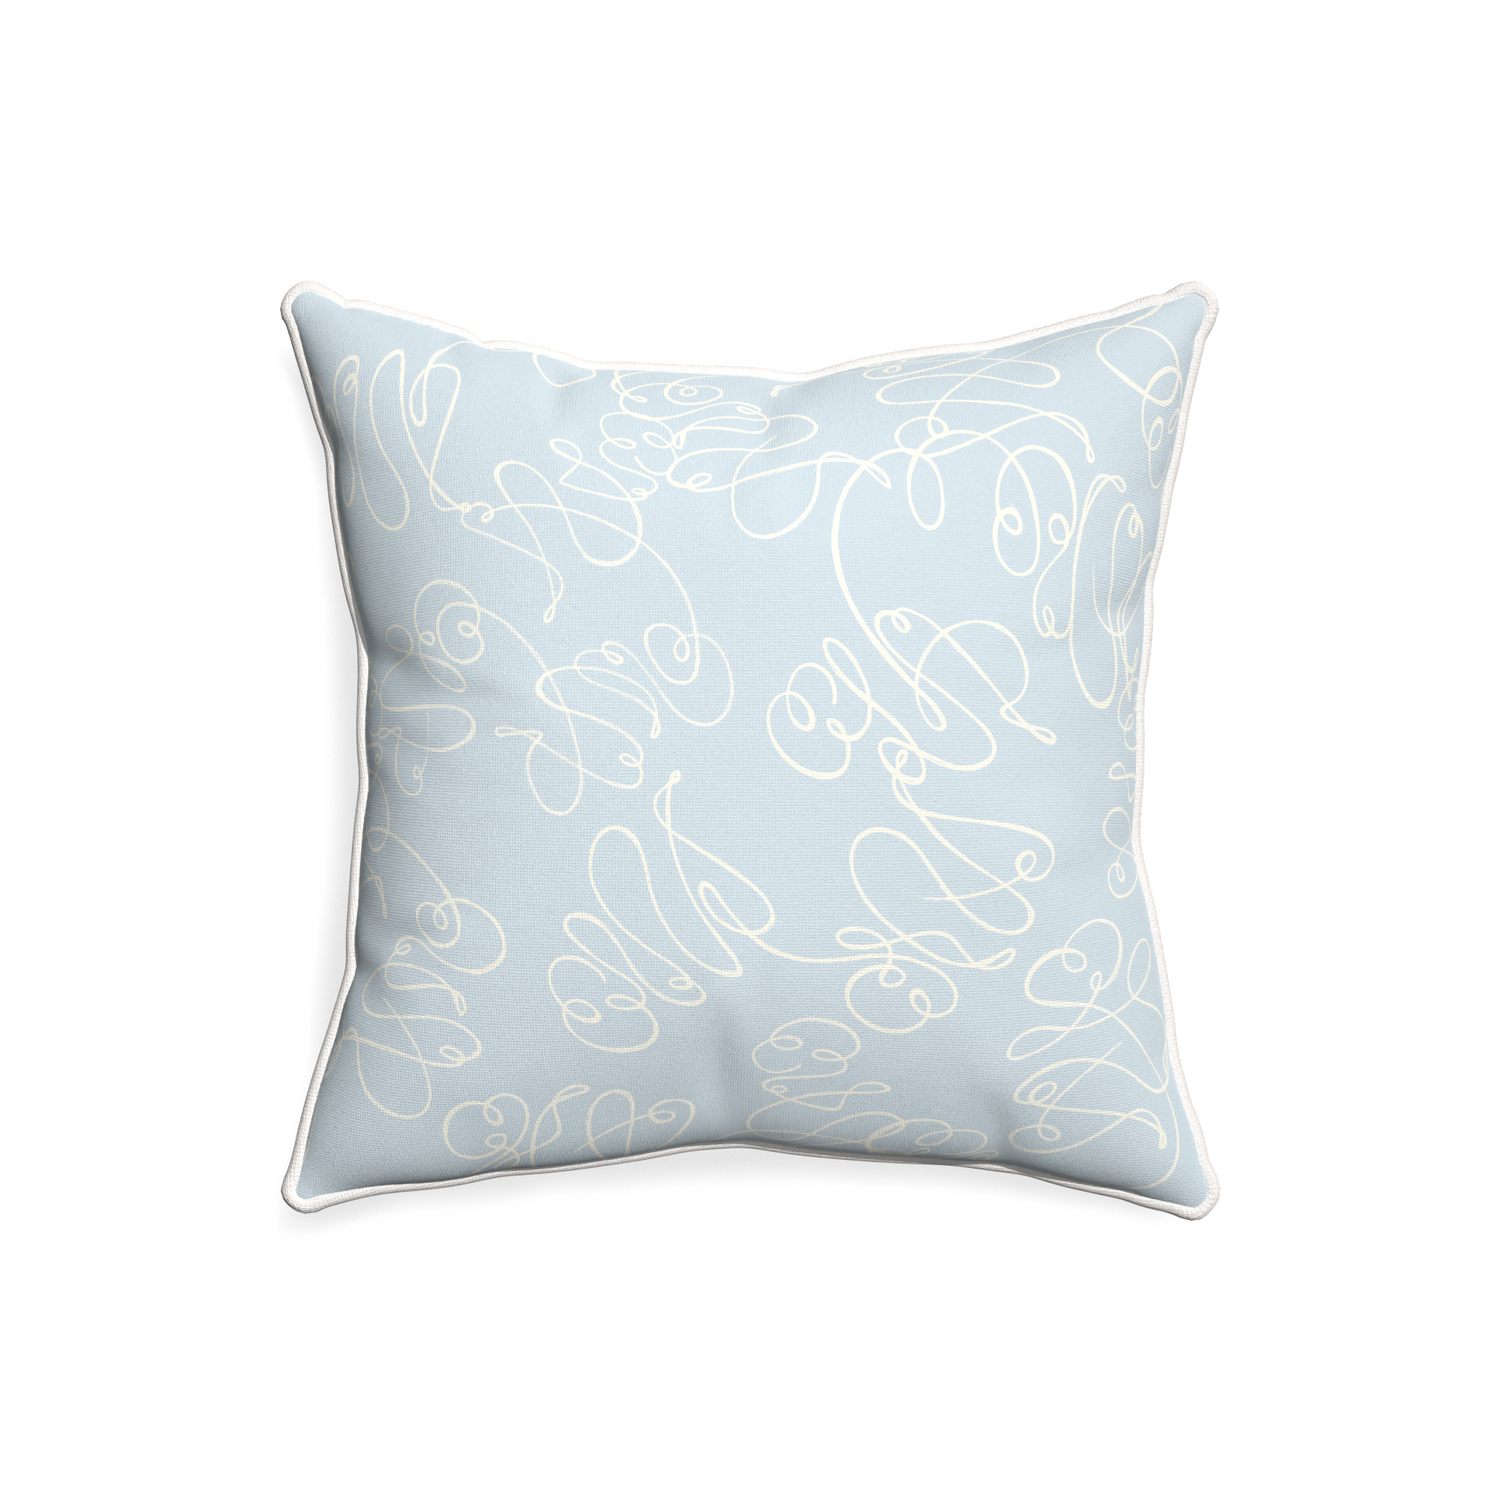 20-square mirabella custom pillow with snow piping on white background